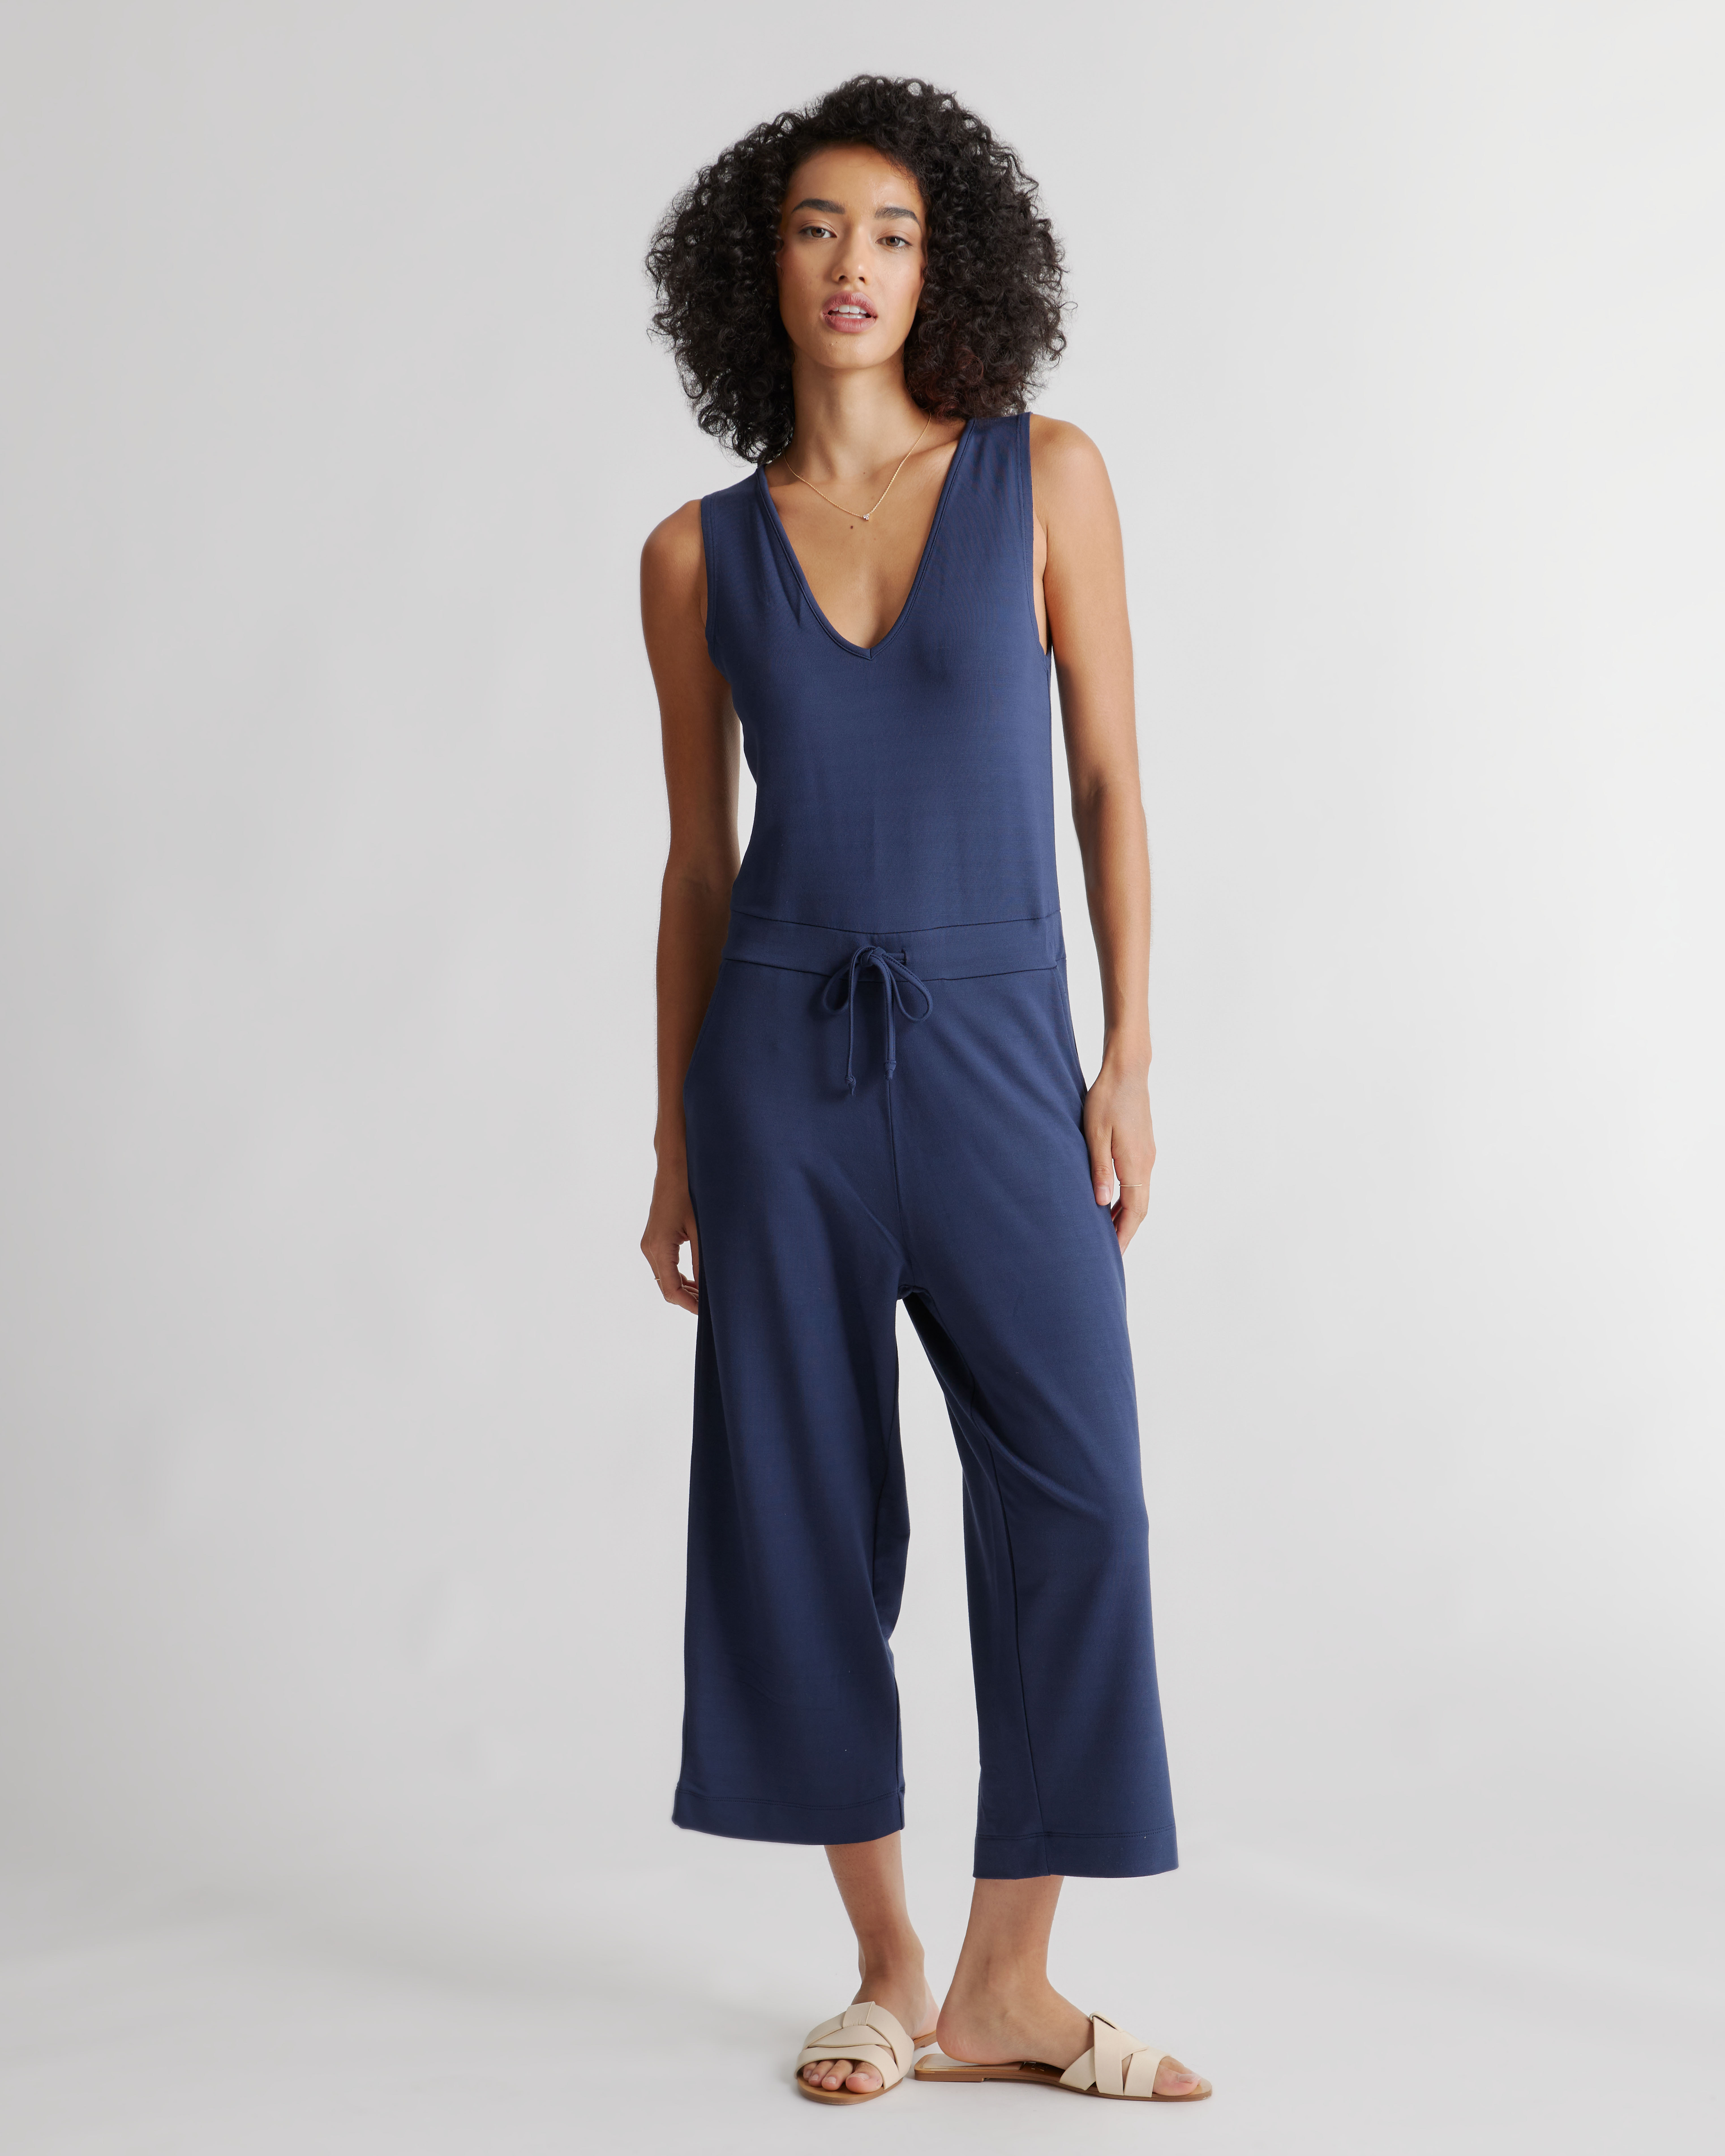 Quince Maternity Organic Cotton Overalls-Jumpsuit in Navy Blue sz